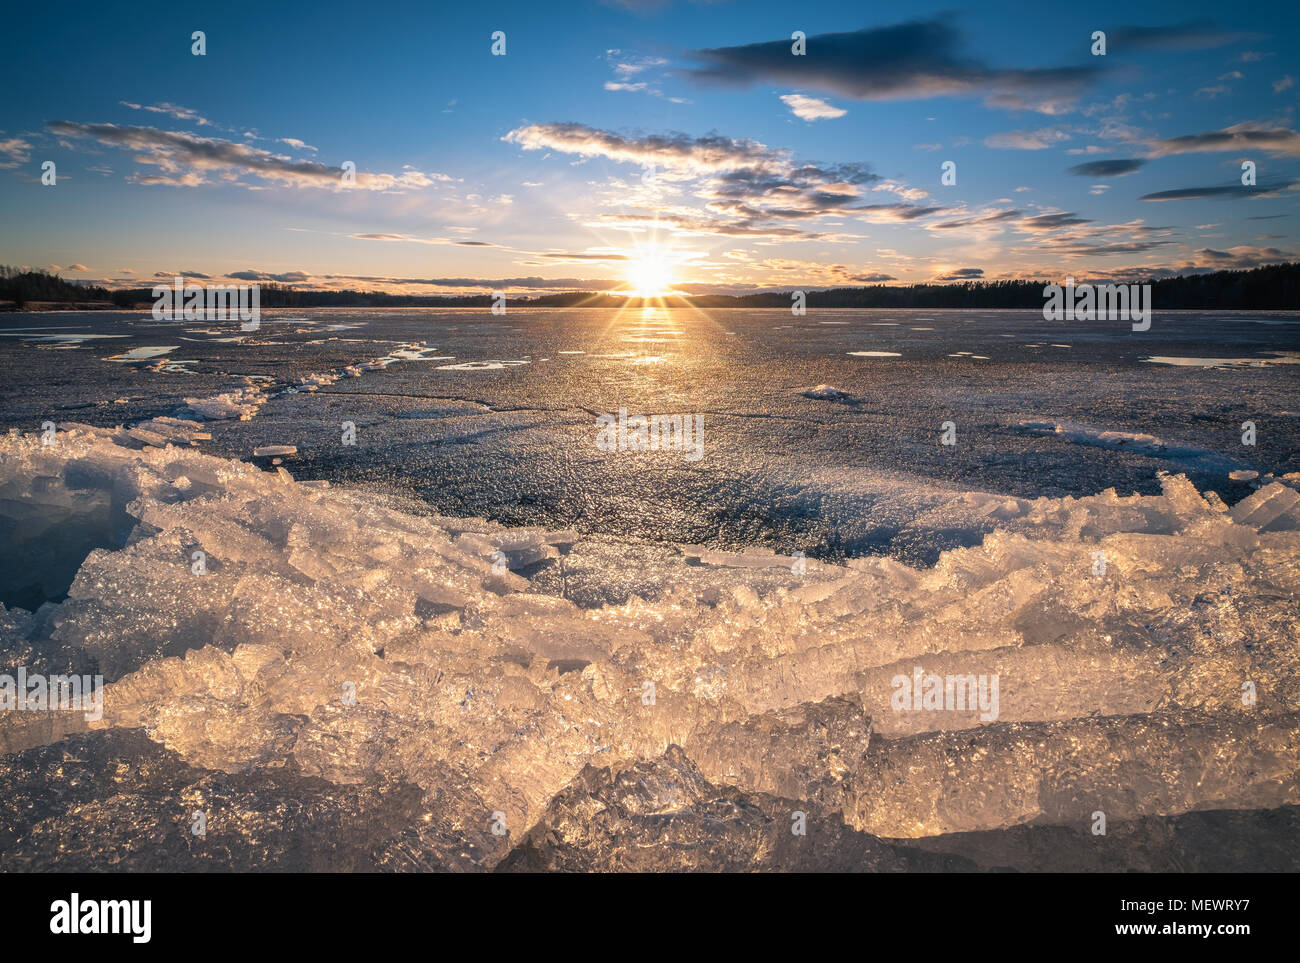 Scenic landscape with sunset and melting ice at beautiful evening in Finland Stock Photo